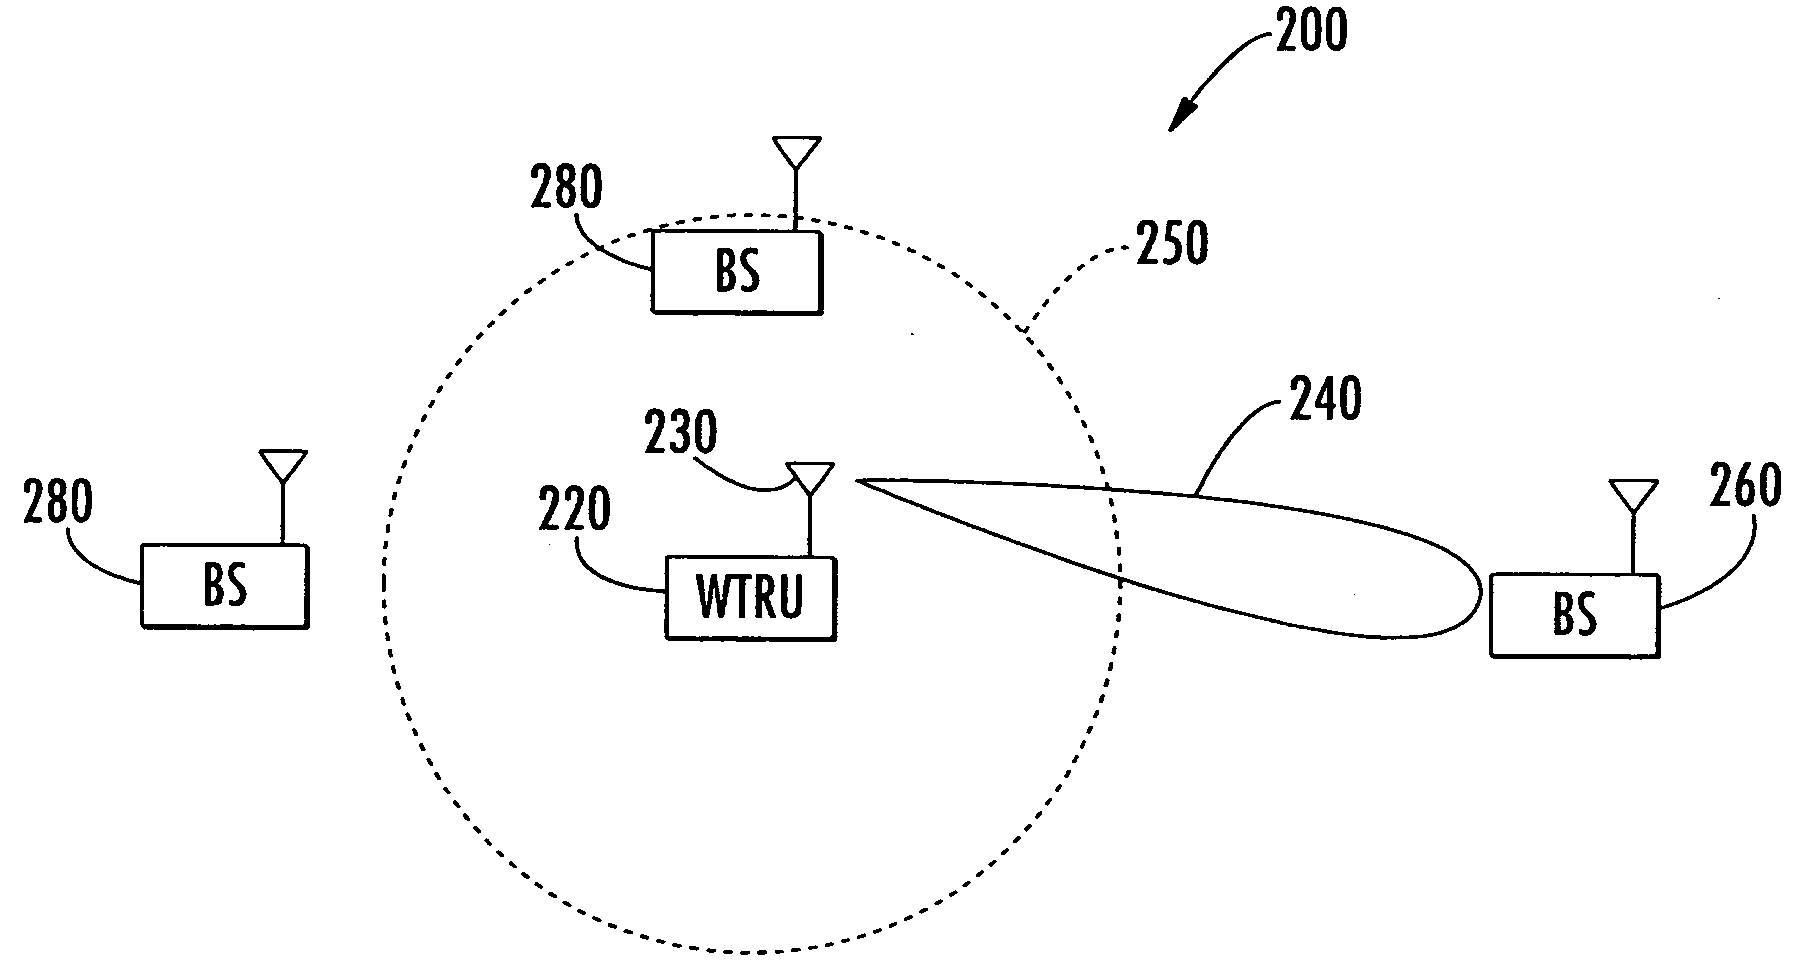 Method for performing measurements for handoff of a mobile unit operating with a switched beam antenna in a wireless communication system, and corresponding system